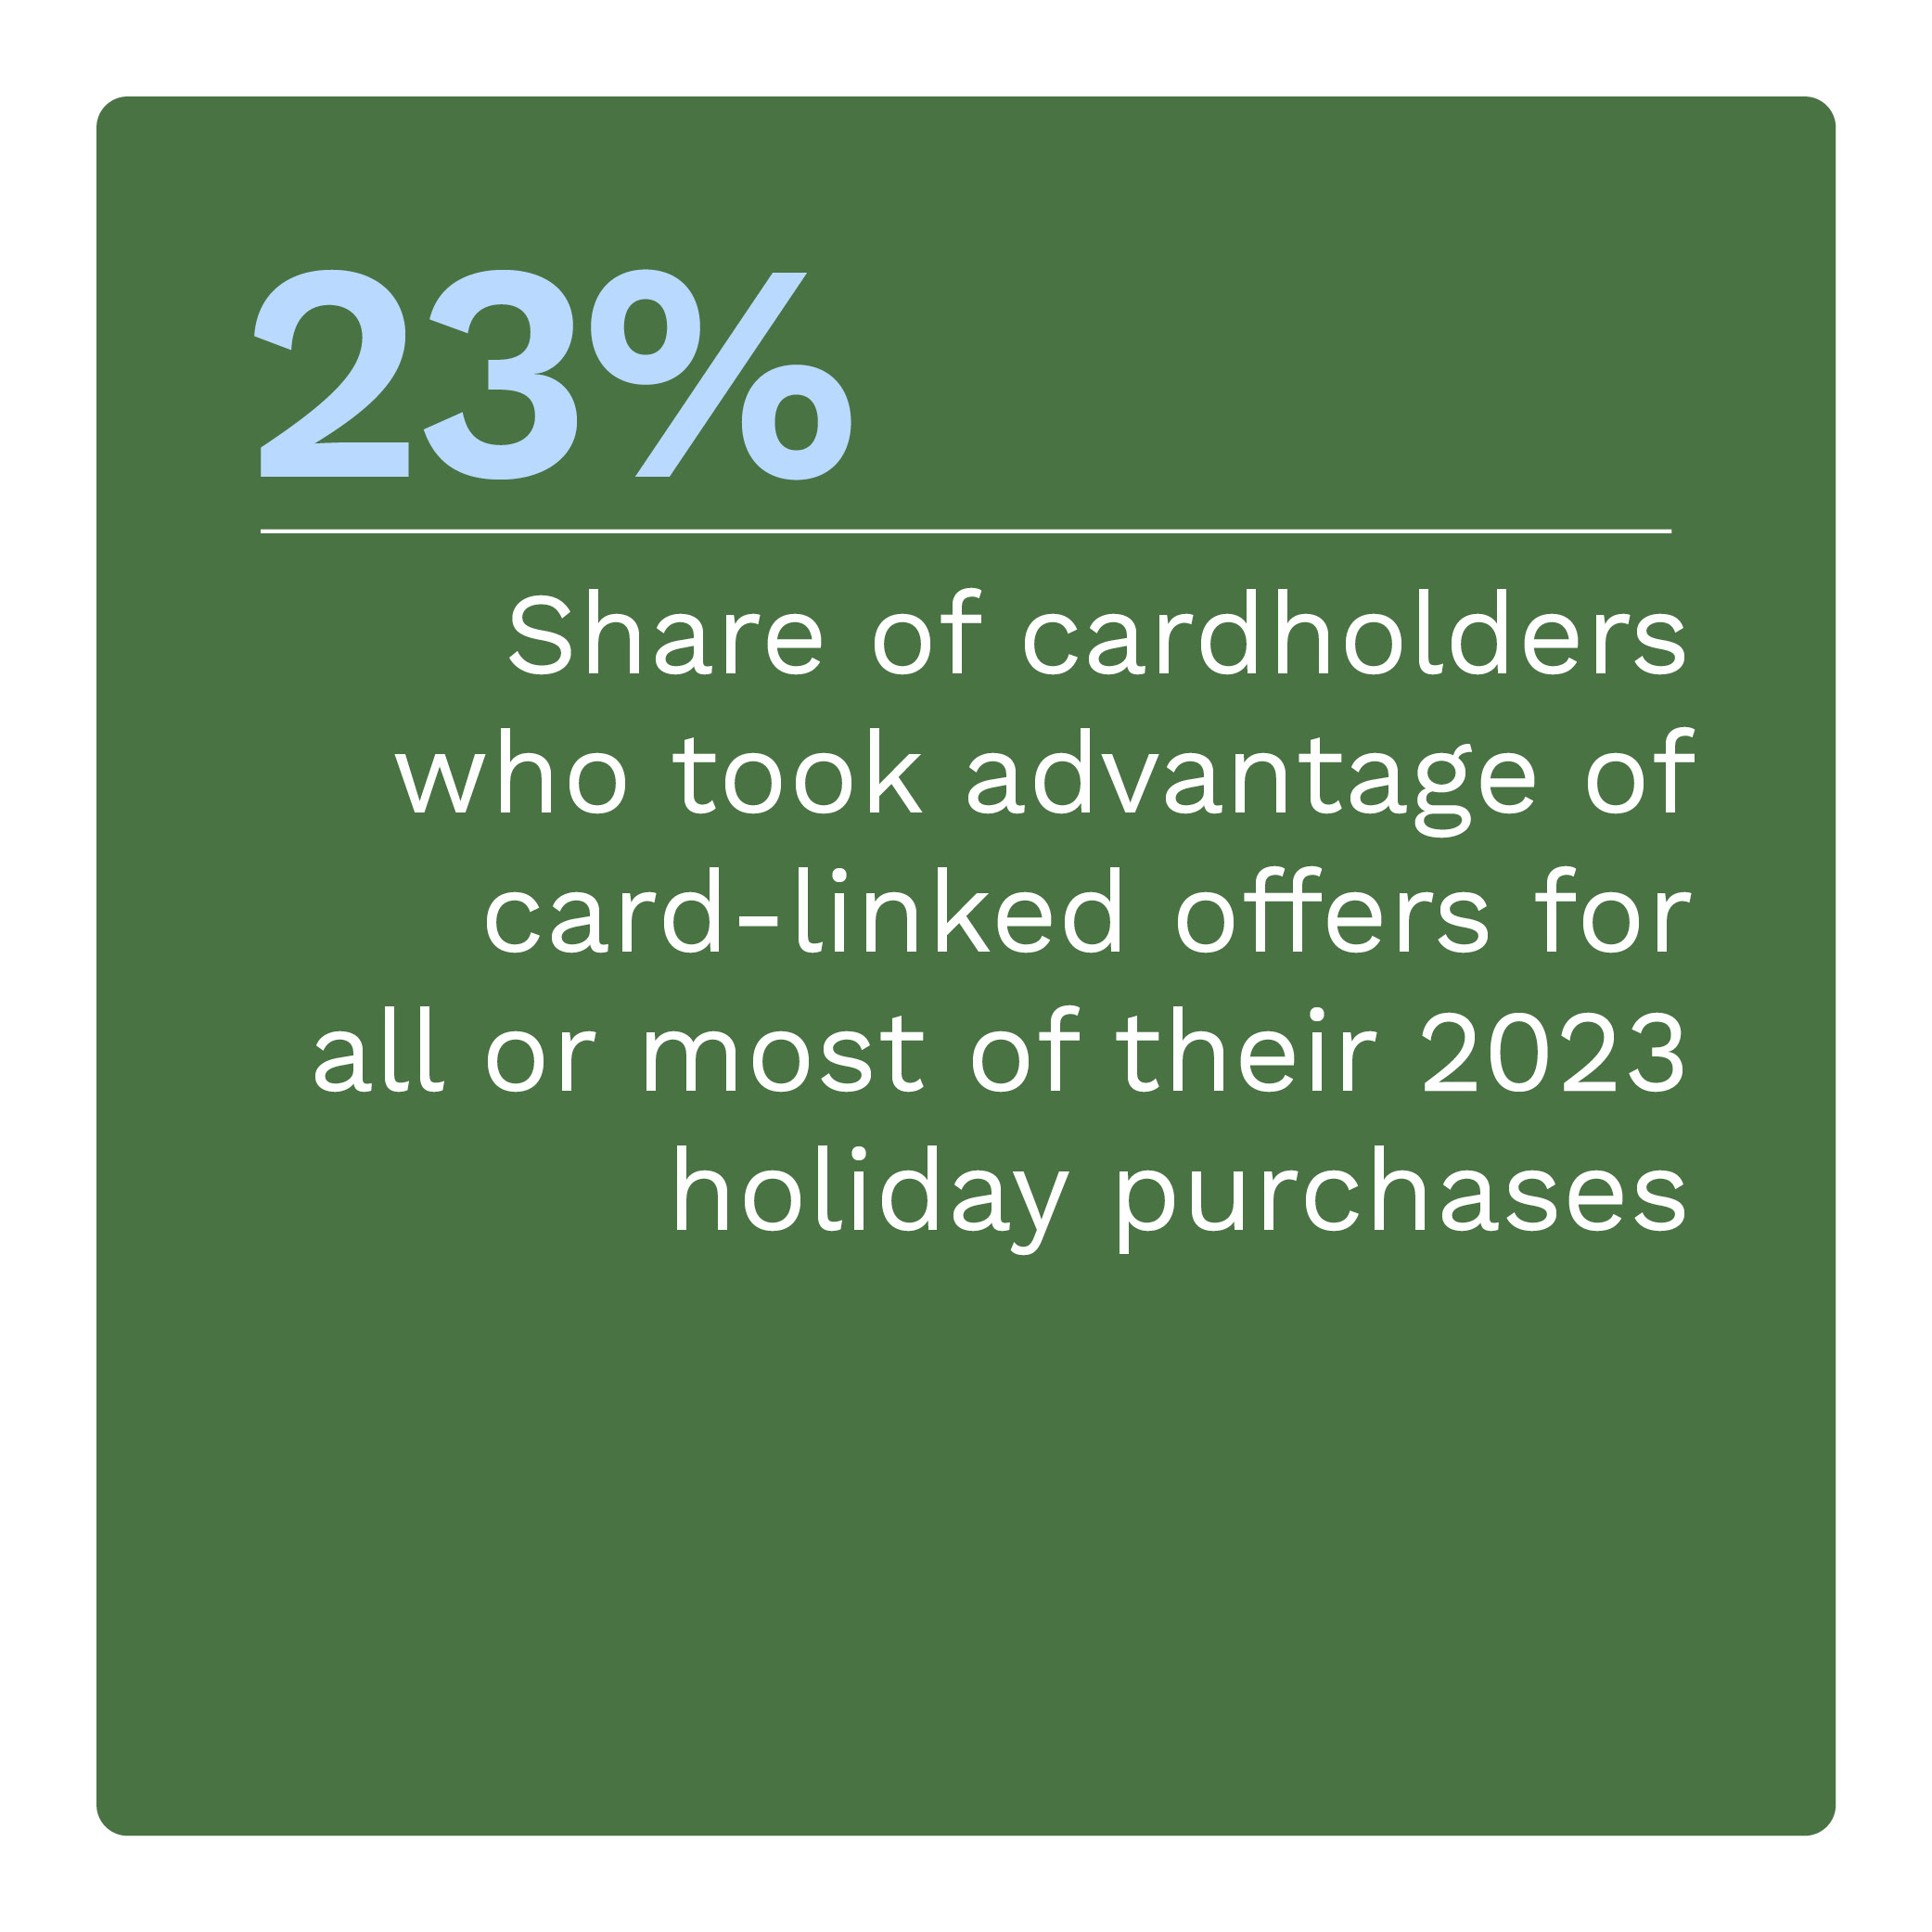 23%: Share of cardholders took advantage of card-linked offers for all or most of their 2023 holiday purchases